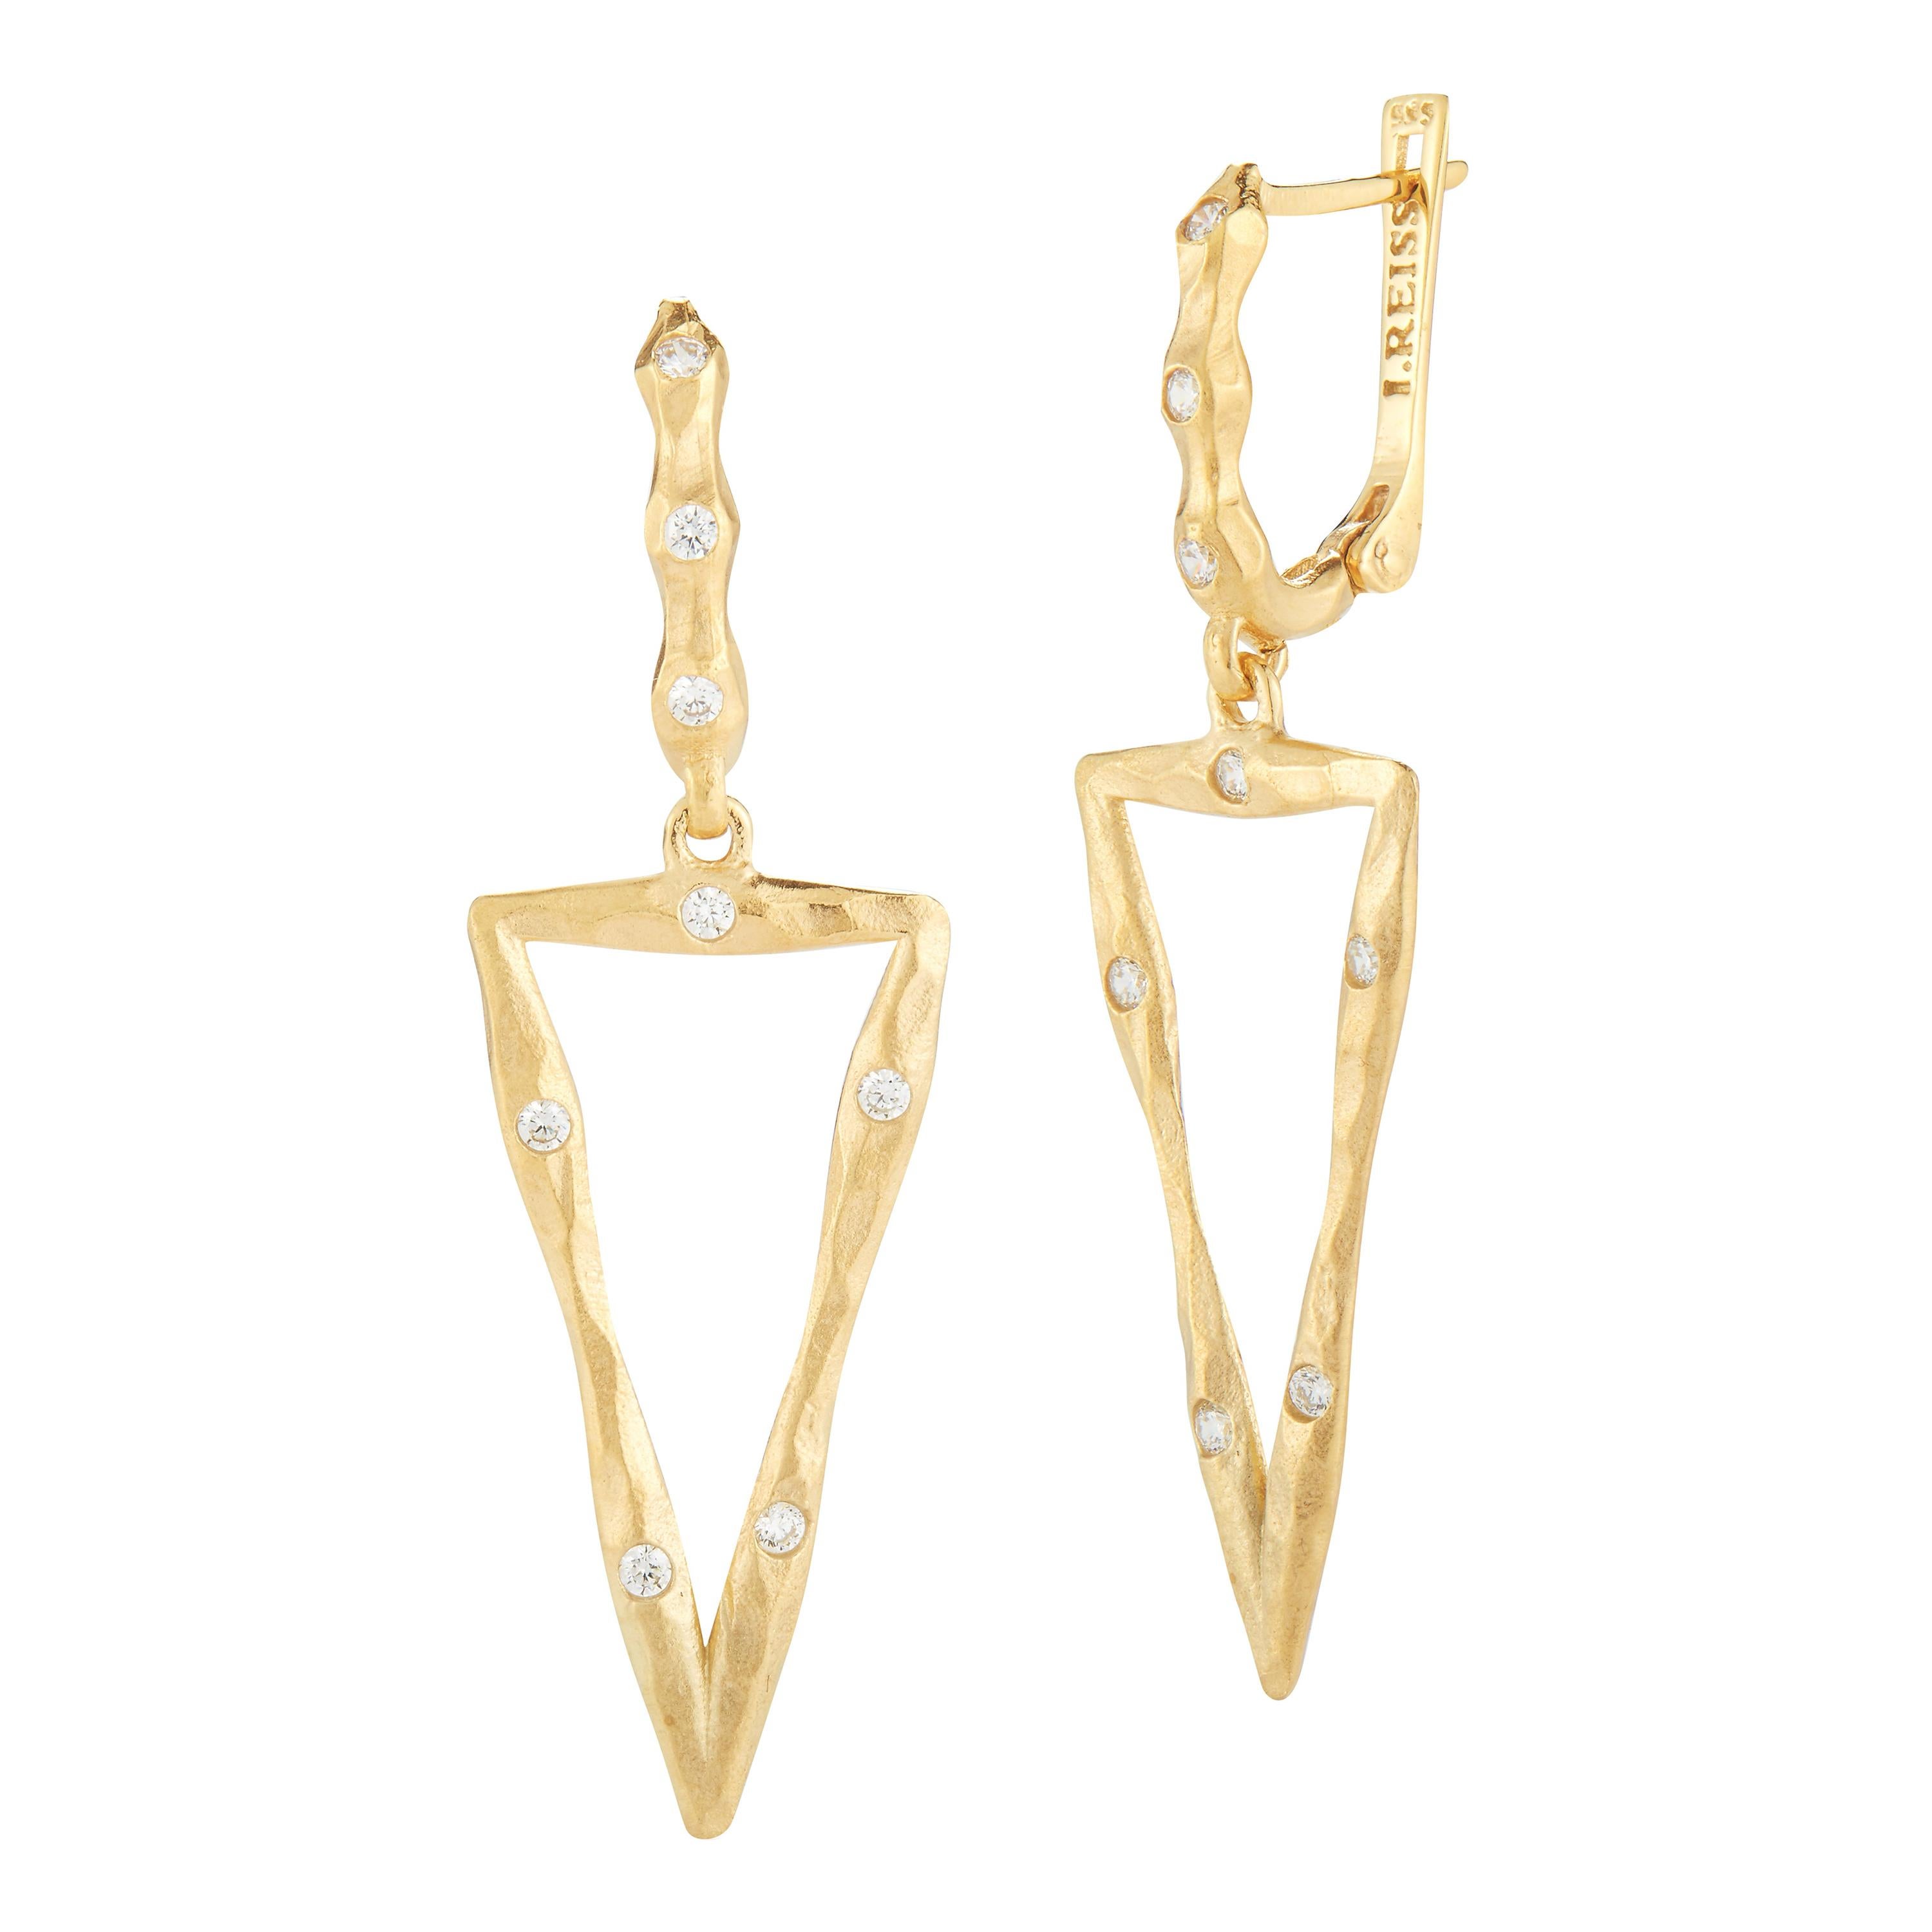 Handcrafted Satin-Finished Dangling Triangle Earrings